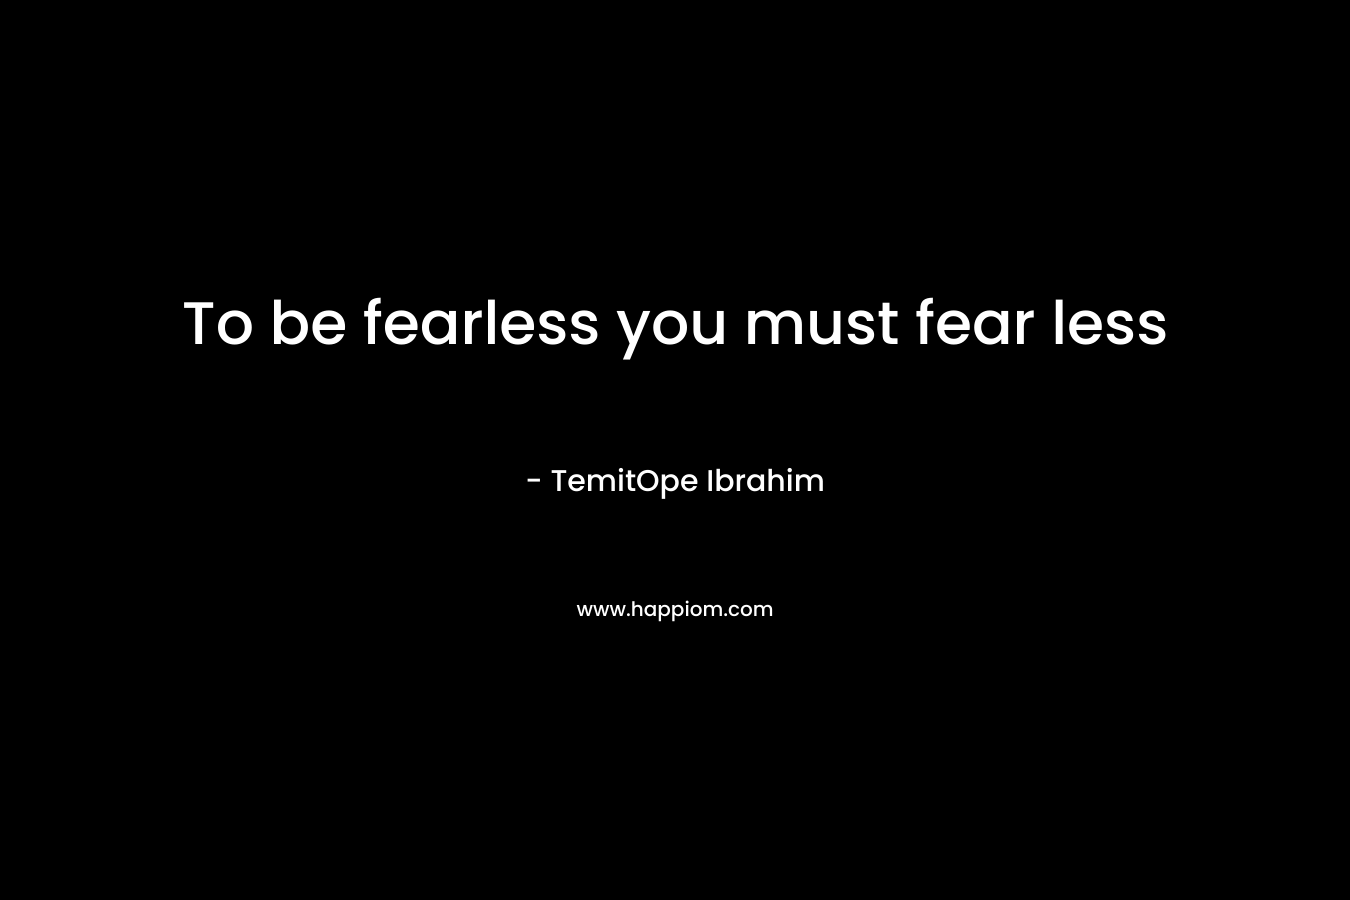 To be fearless you must fear less